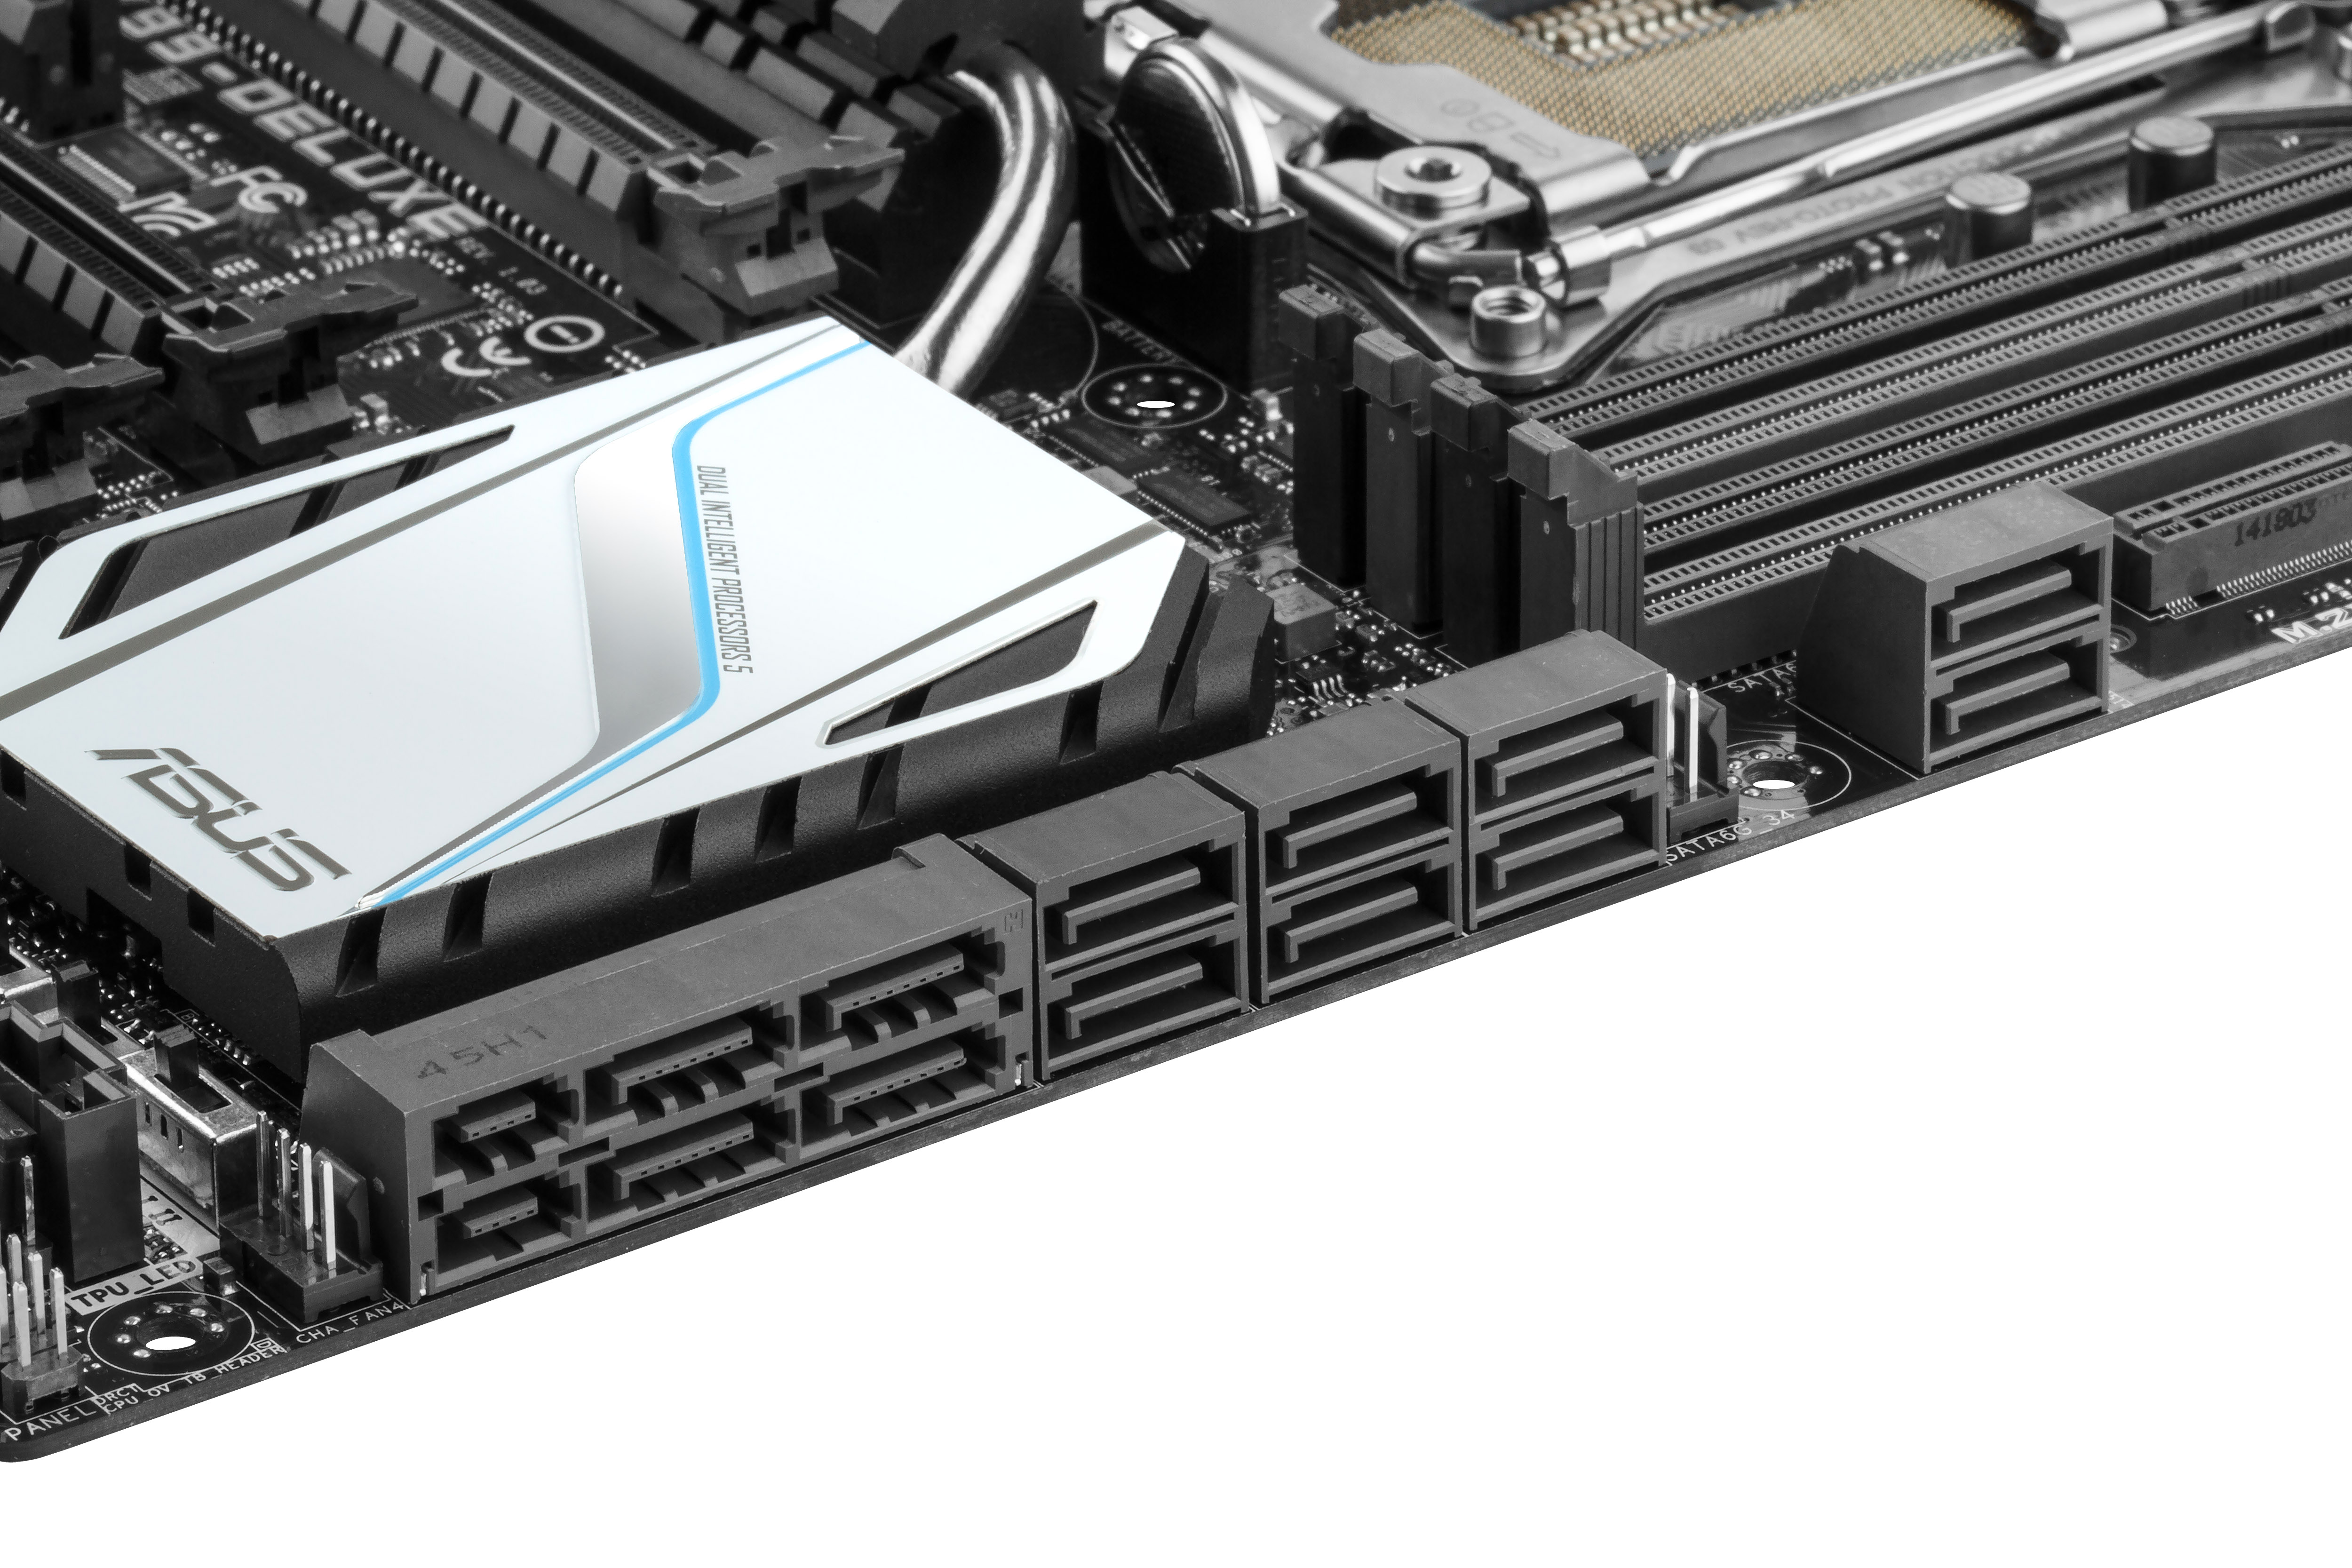 ASUS X99-Deluxe Overview, Board Features - The Intel Haswell-E X99 